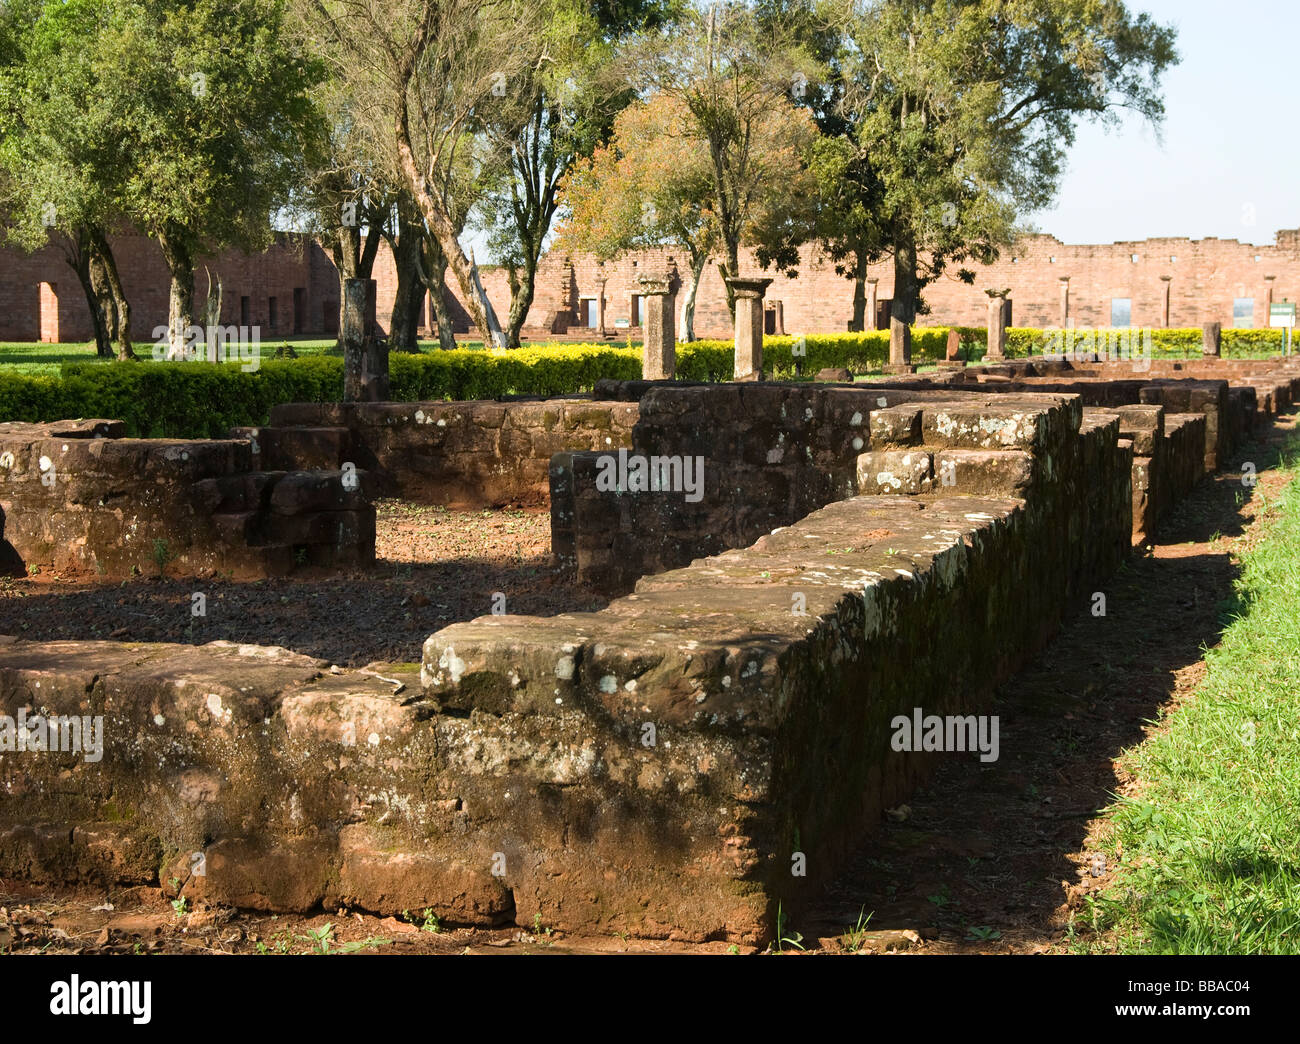 Paraguay.Jesuits Reductions.Reduction of Jésus.Home of indians.UNESCO World Heritage Site. Stock Photo